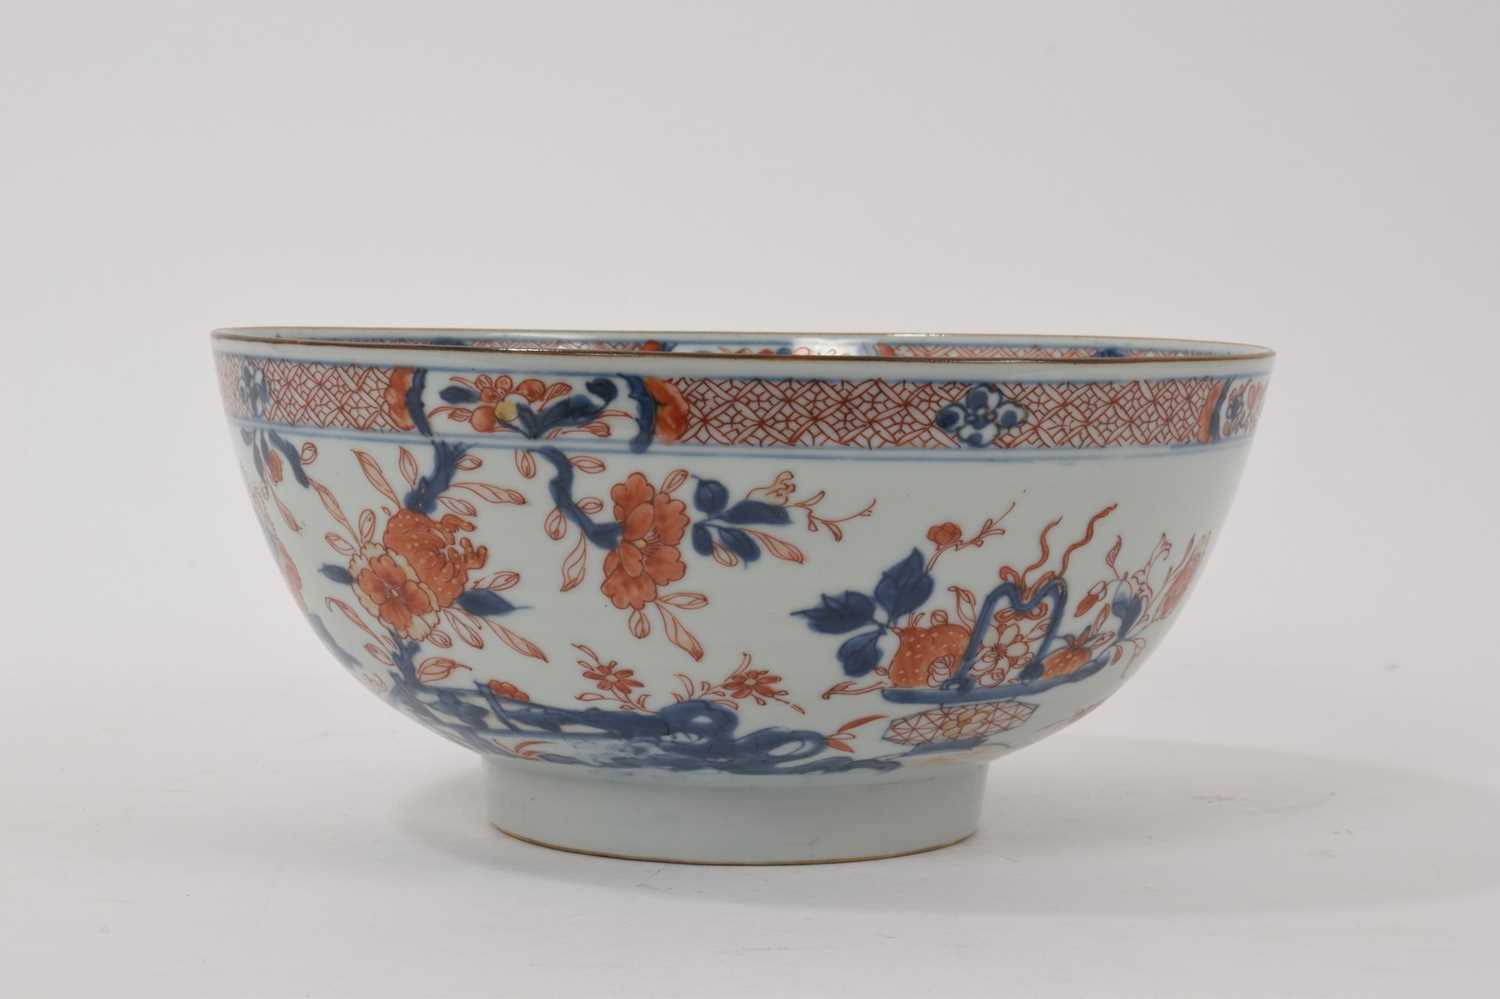 Unusual antique Chinese Imari porcelain bowl with panel of censer and ruyi scepter - Image 3 of 5